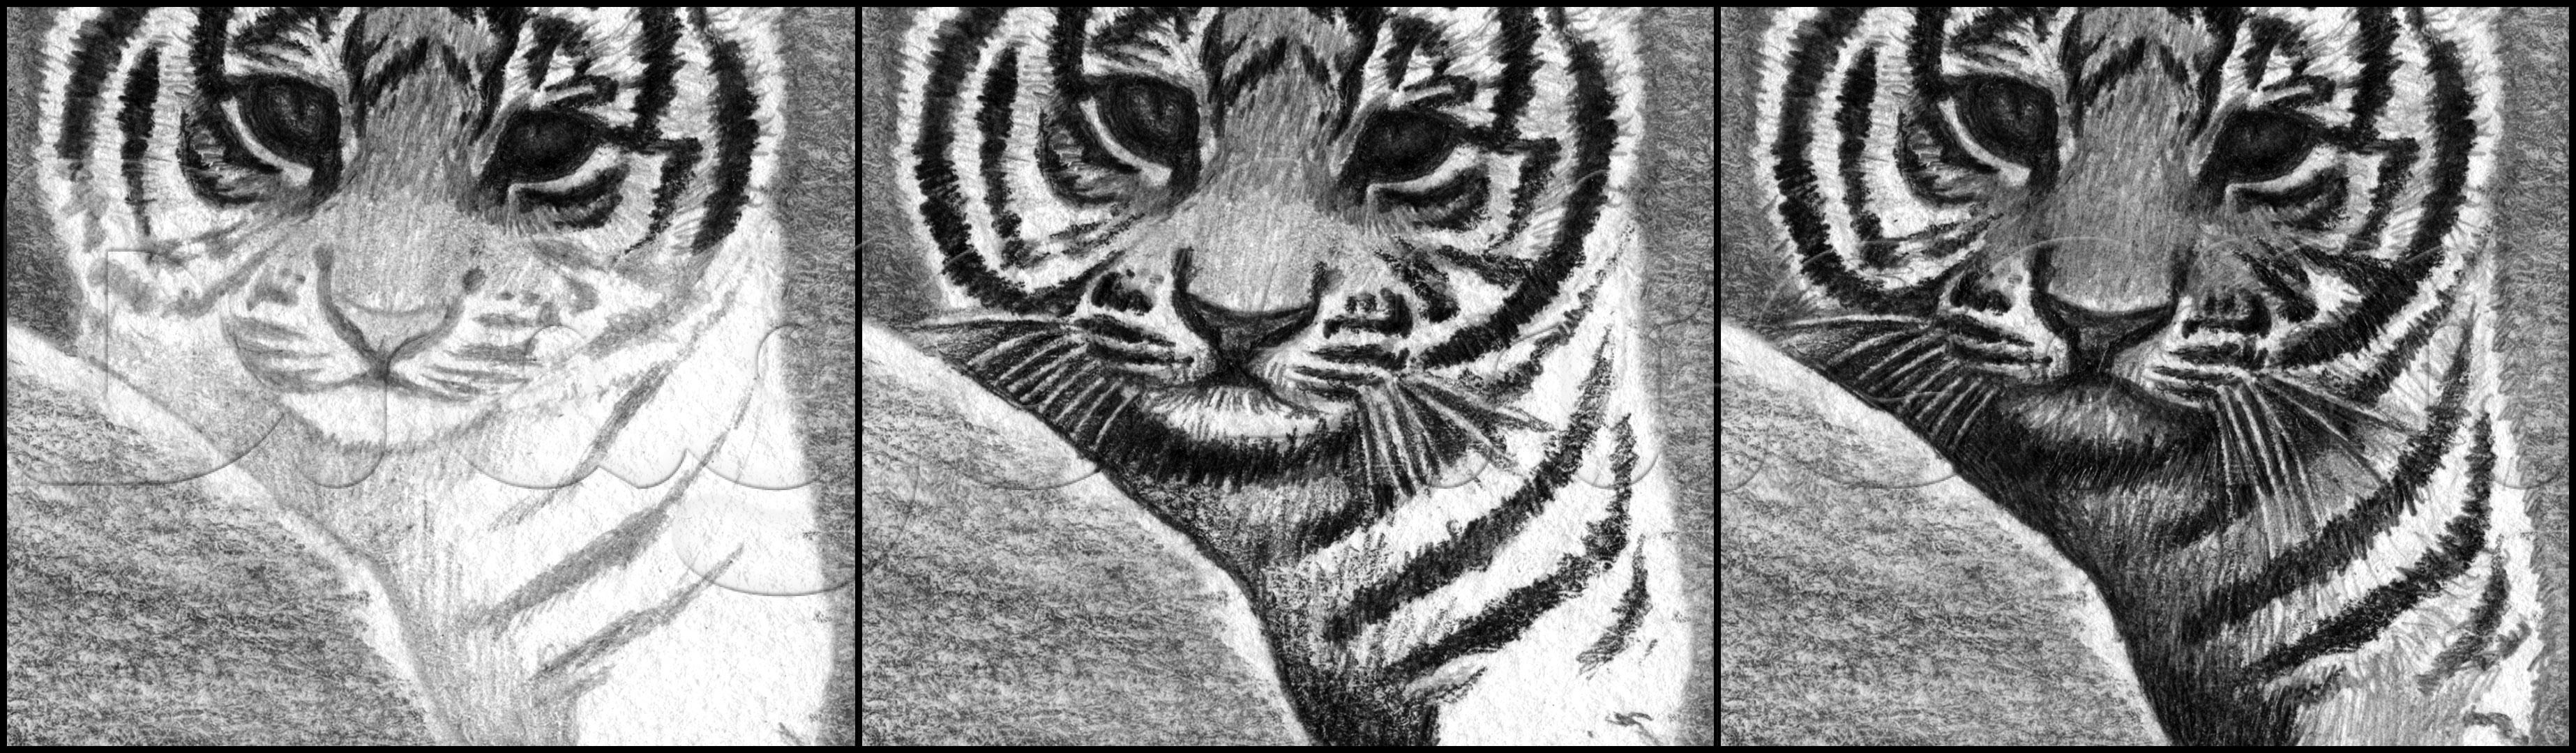 how-to-draw-a-tiger-cub-step-10_1_000000174521_5